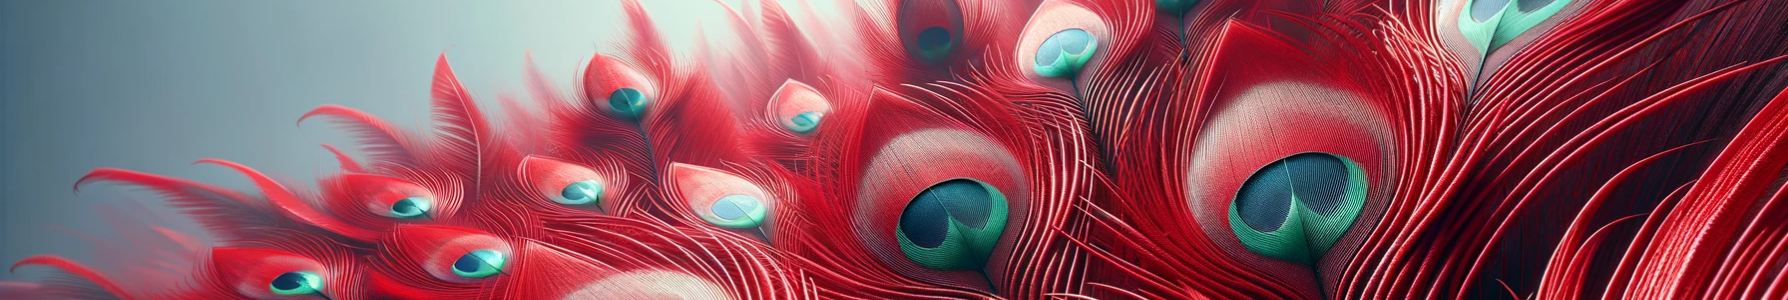 Social Media Strategy Blog header image featuring a realistic depiction of red peacock feathers with dark green and black feathers.